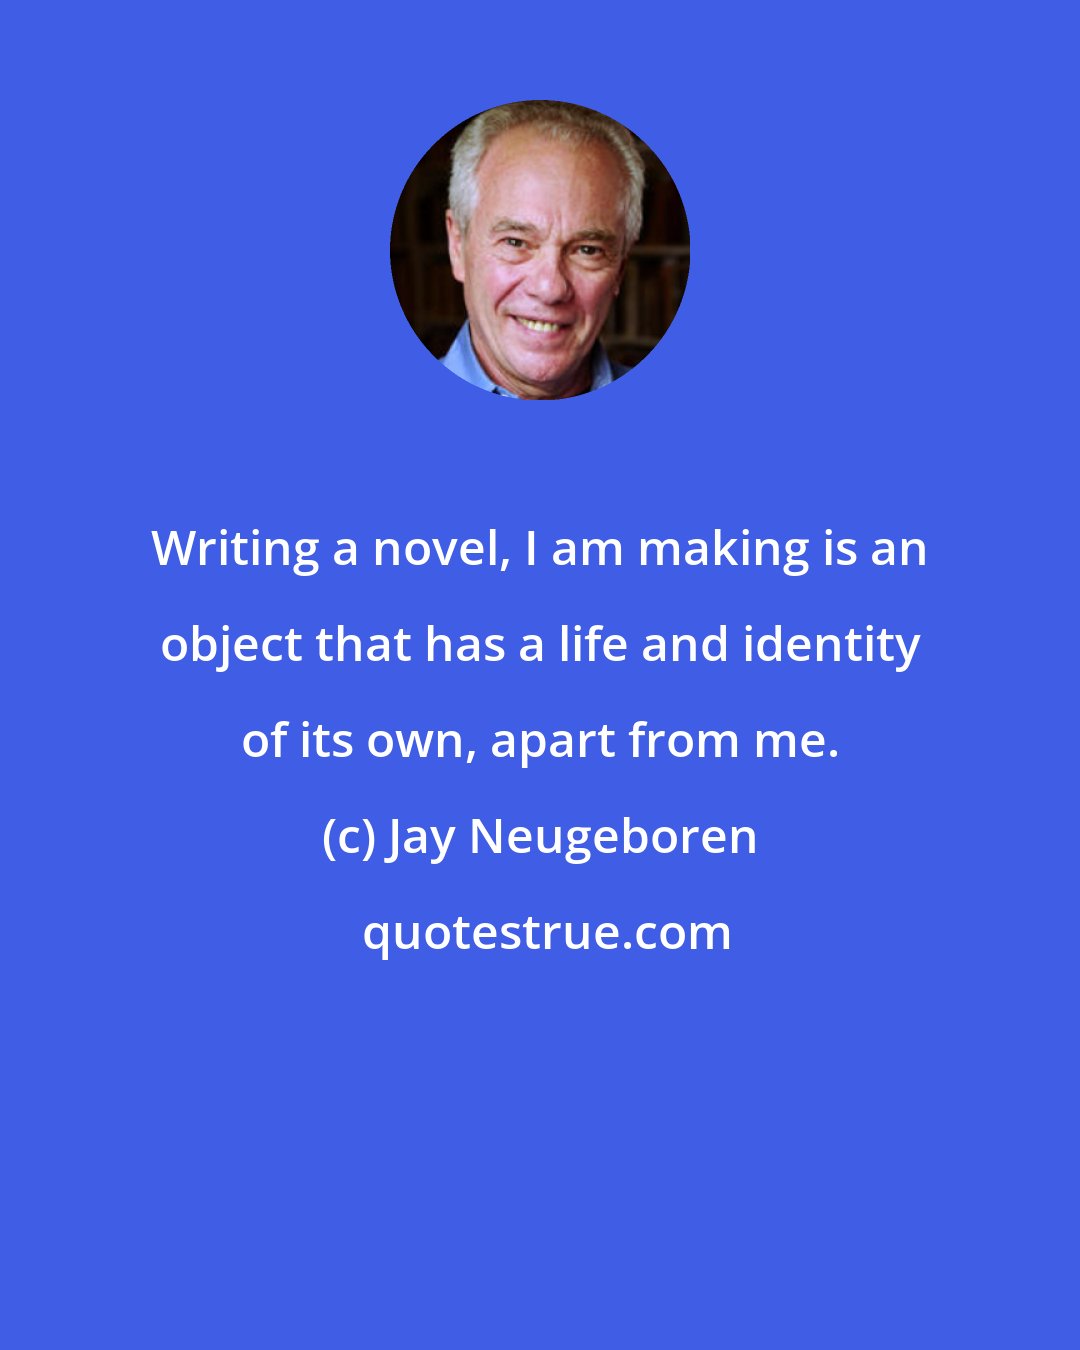 Jay Neugeboren: Writing a novel, I am making is an object that has a life and identity of its own, apart from me.